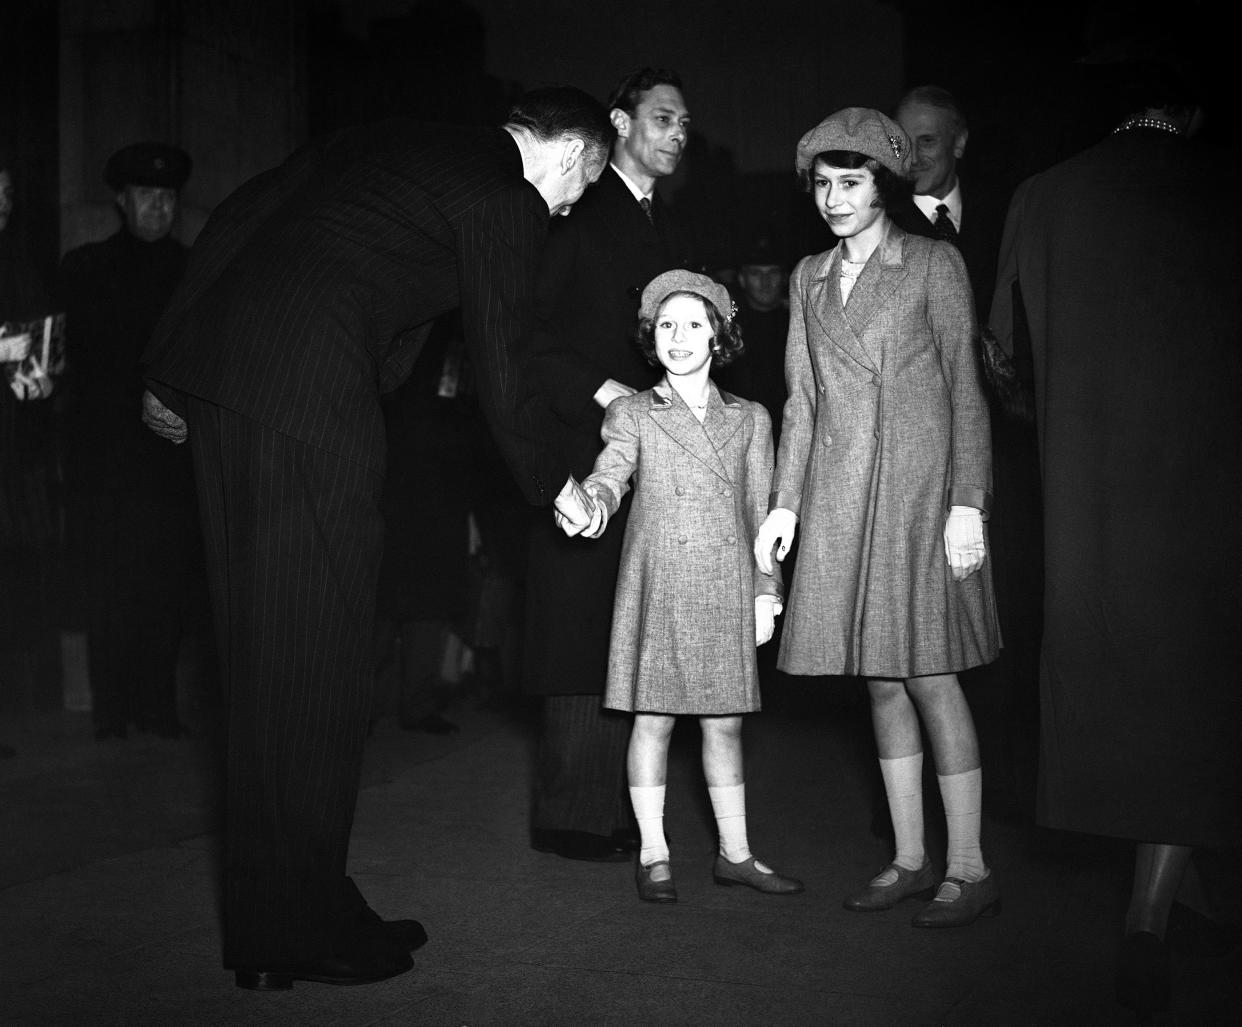 The Royal Family visited the B.B.C. at Broadcasting house in London on March 13, 1939. Princess Margaret Rose and Princess Elizabeth shaking hands with Frederick Ogilvie, Director General of the B.B.C. after the Royal family's tour. 